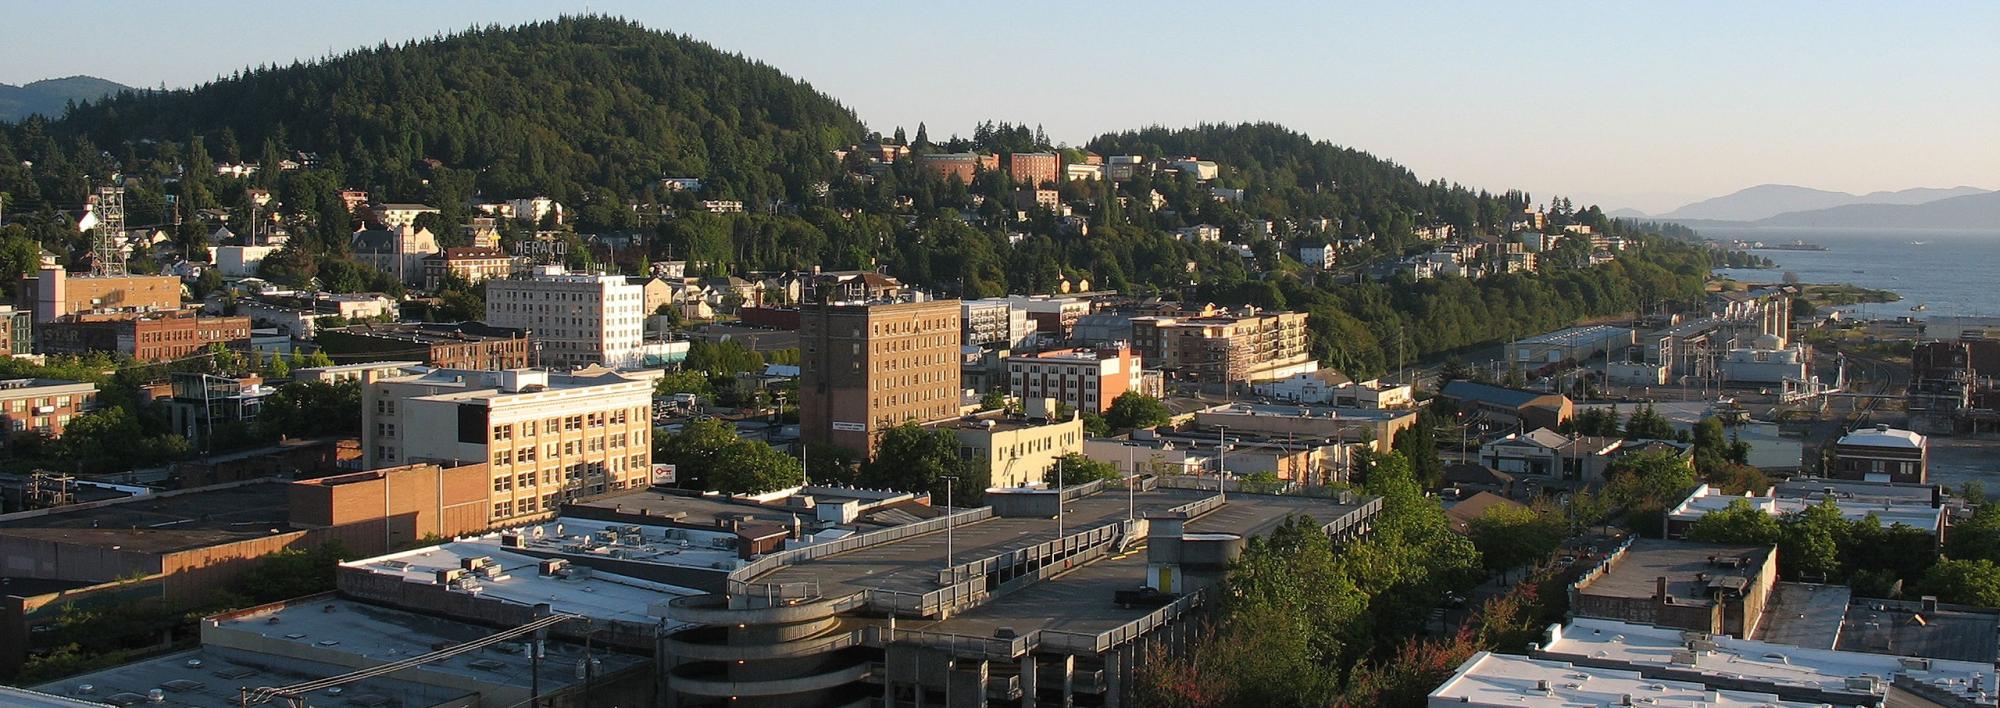 Bellingham city skyline with Western's campus in the background